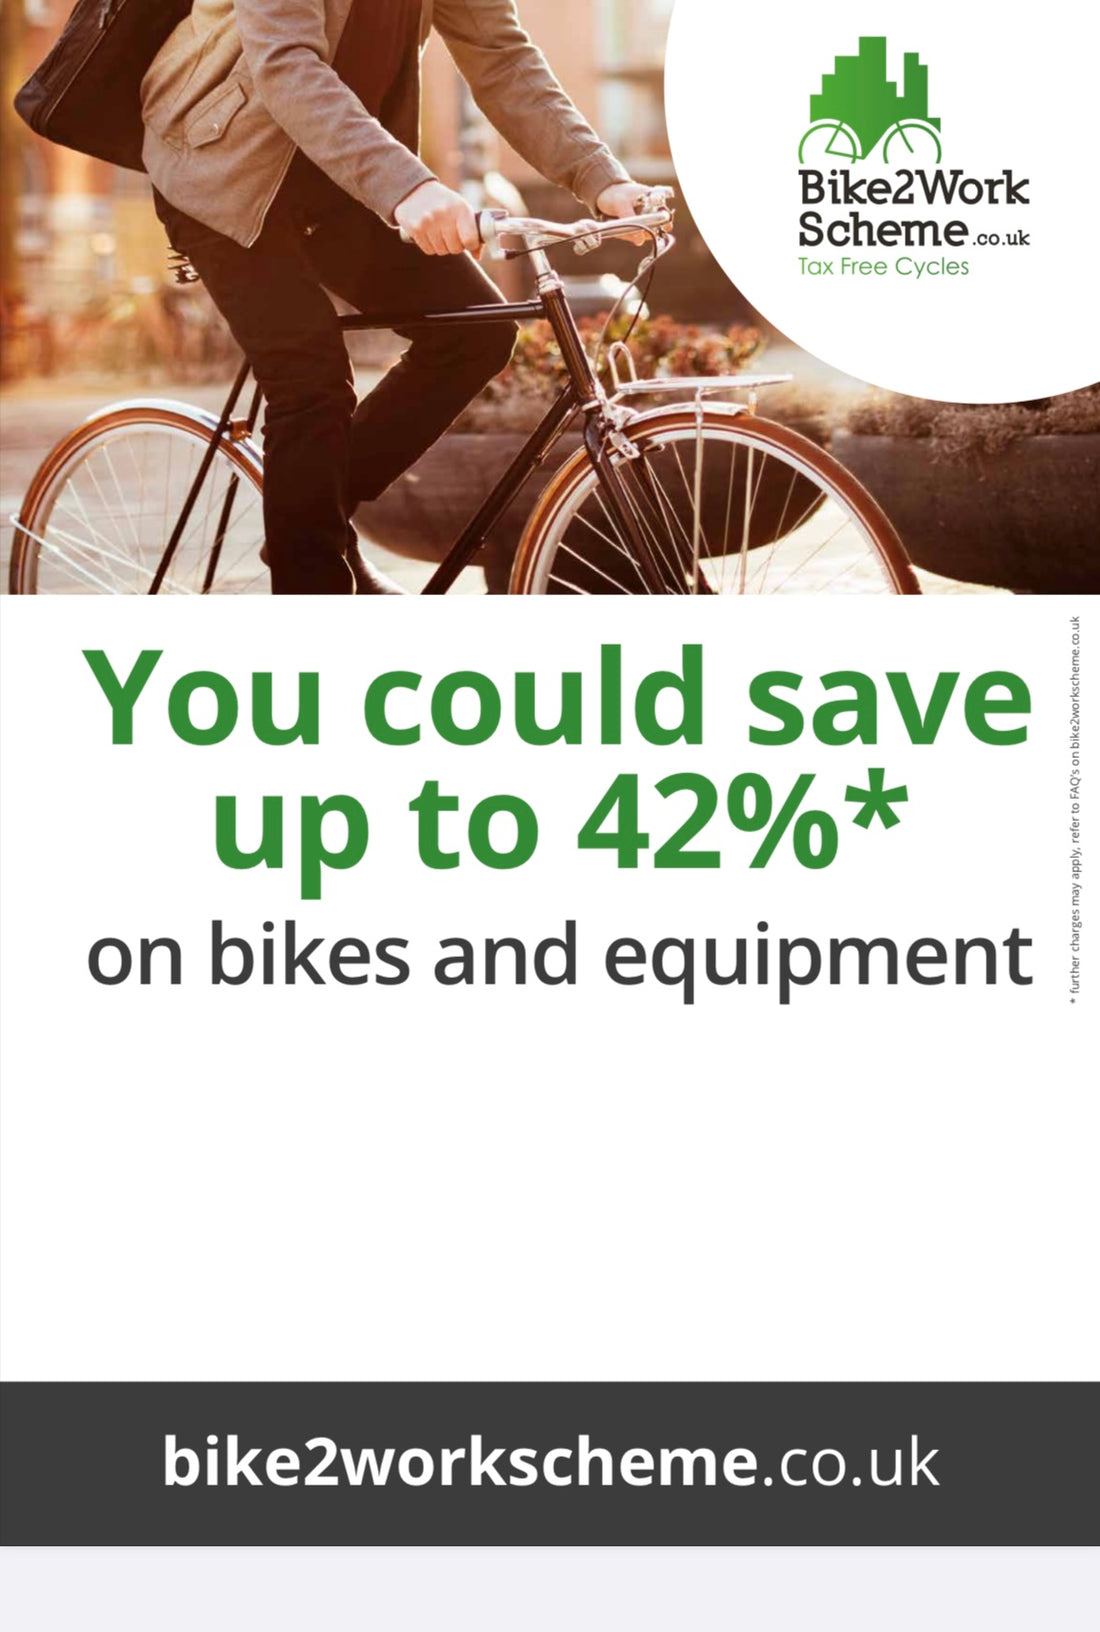 Introducing Elite Scooters Scotland's Partnership with the Bike2Work Scheme: Your Ticket to a Greener Commute